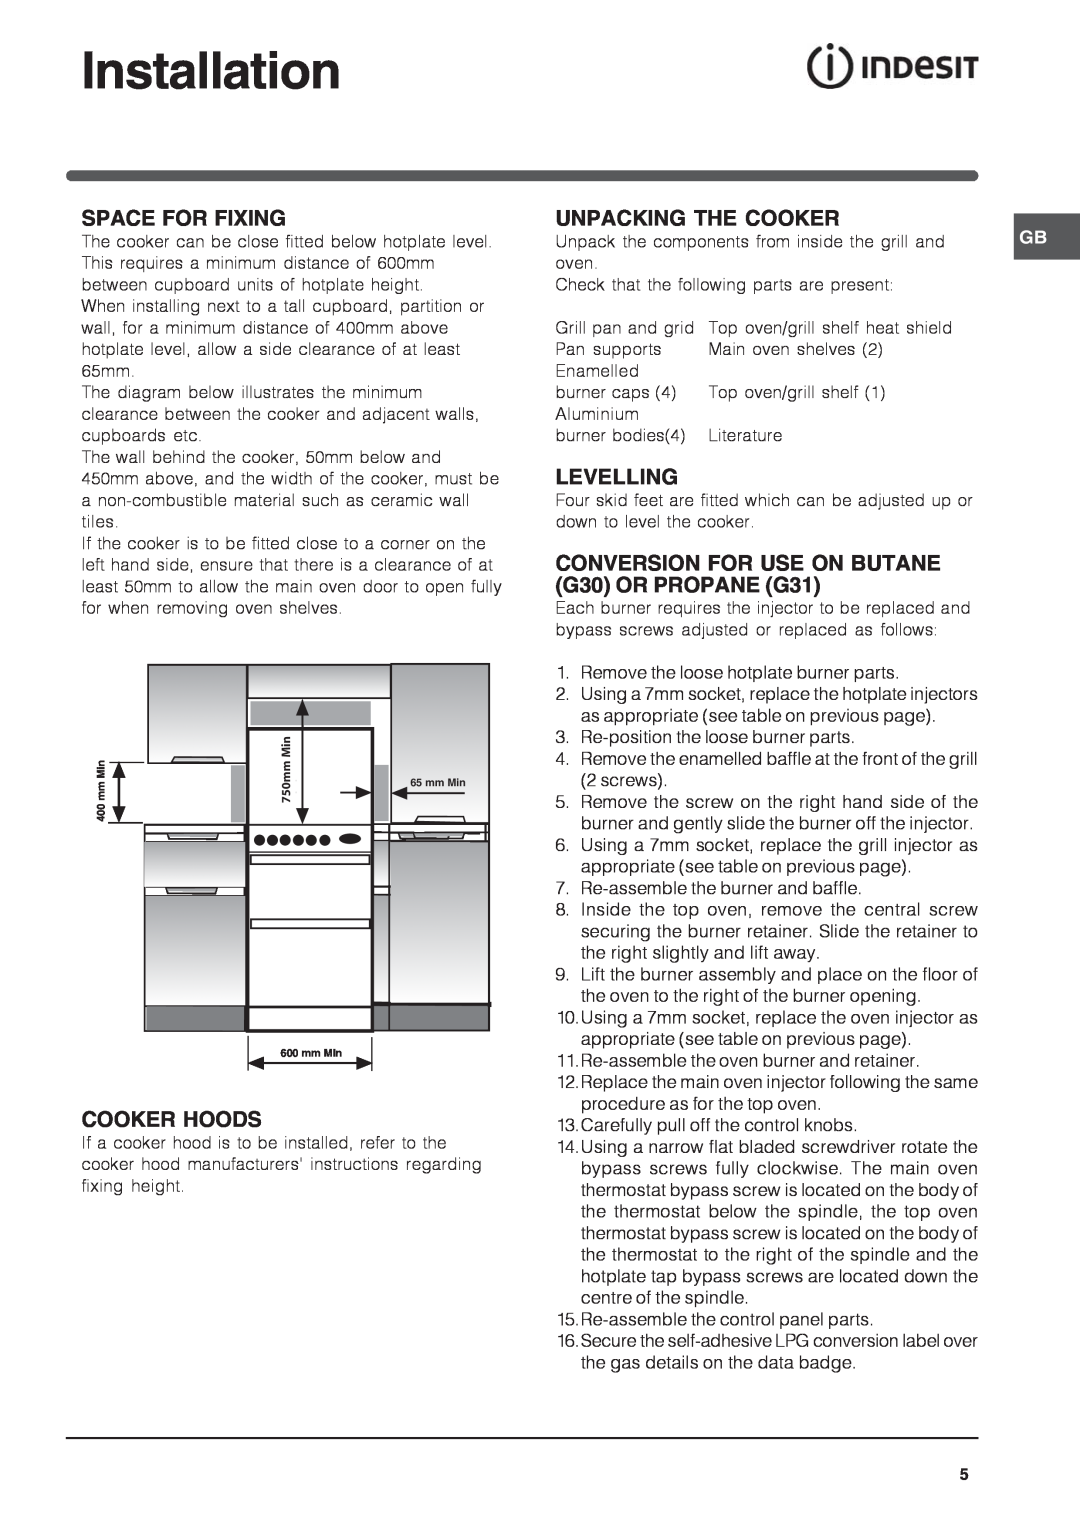 Indesit ID60G2 operating instructions Space For Fixing, Cooker Hoods, Unpacking The Cooker, Levelling, Installation 